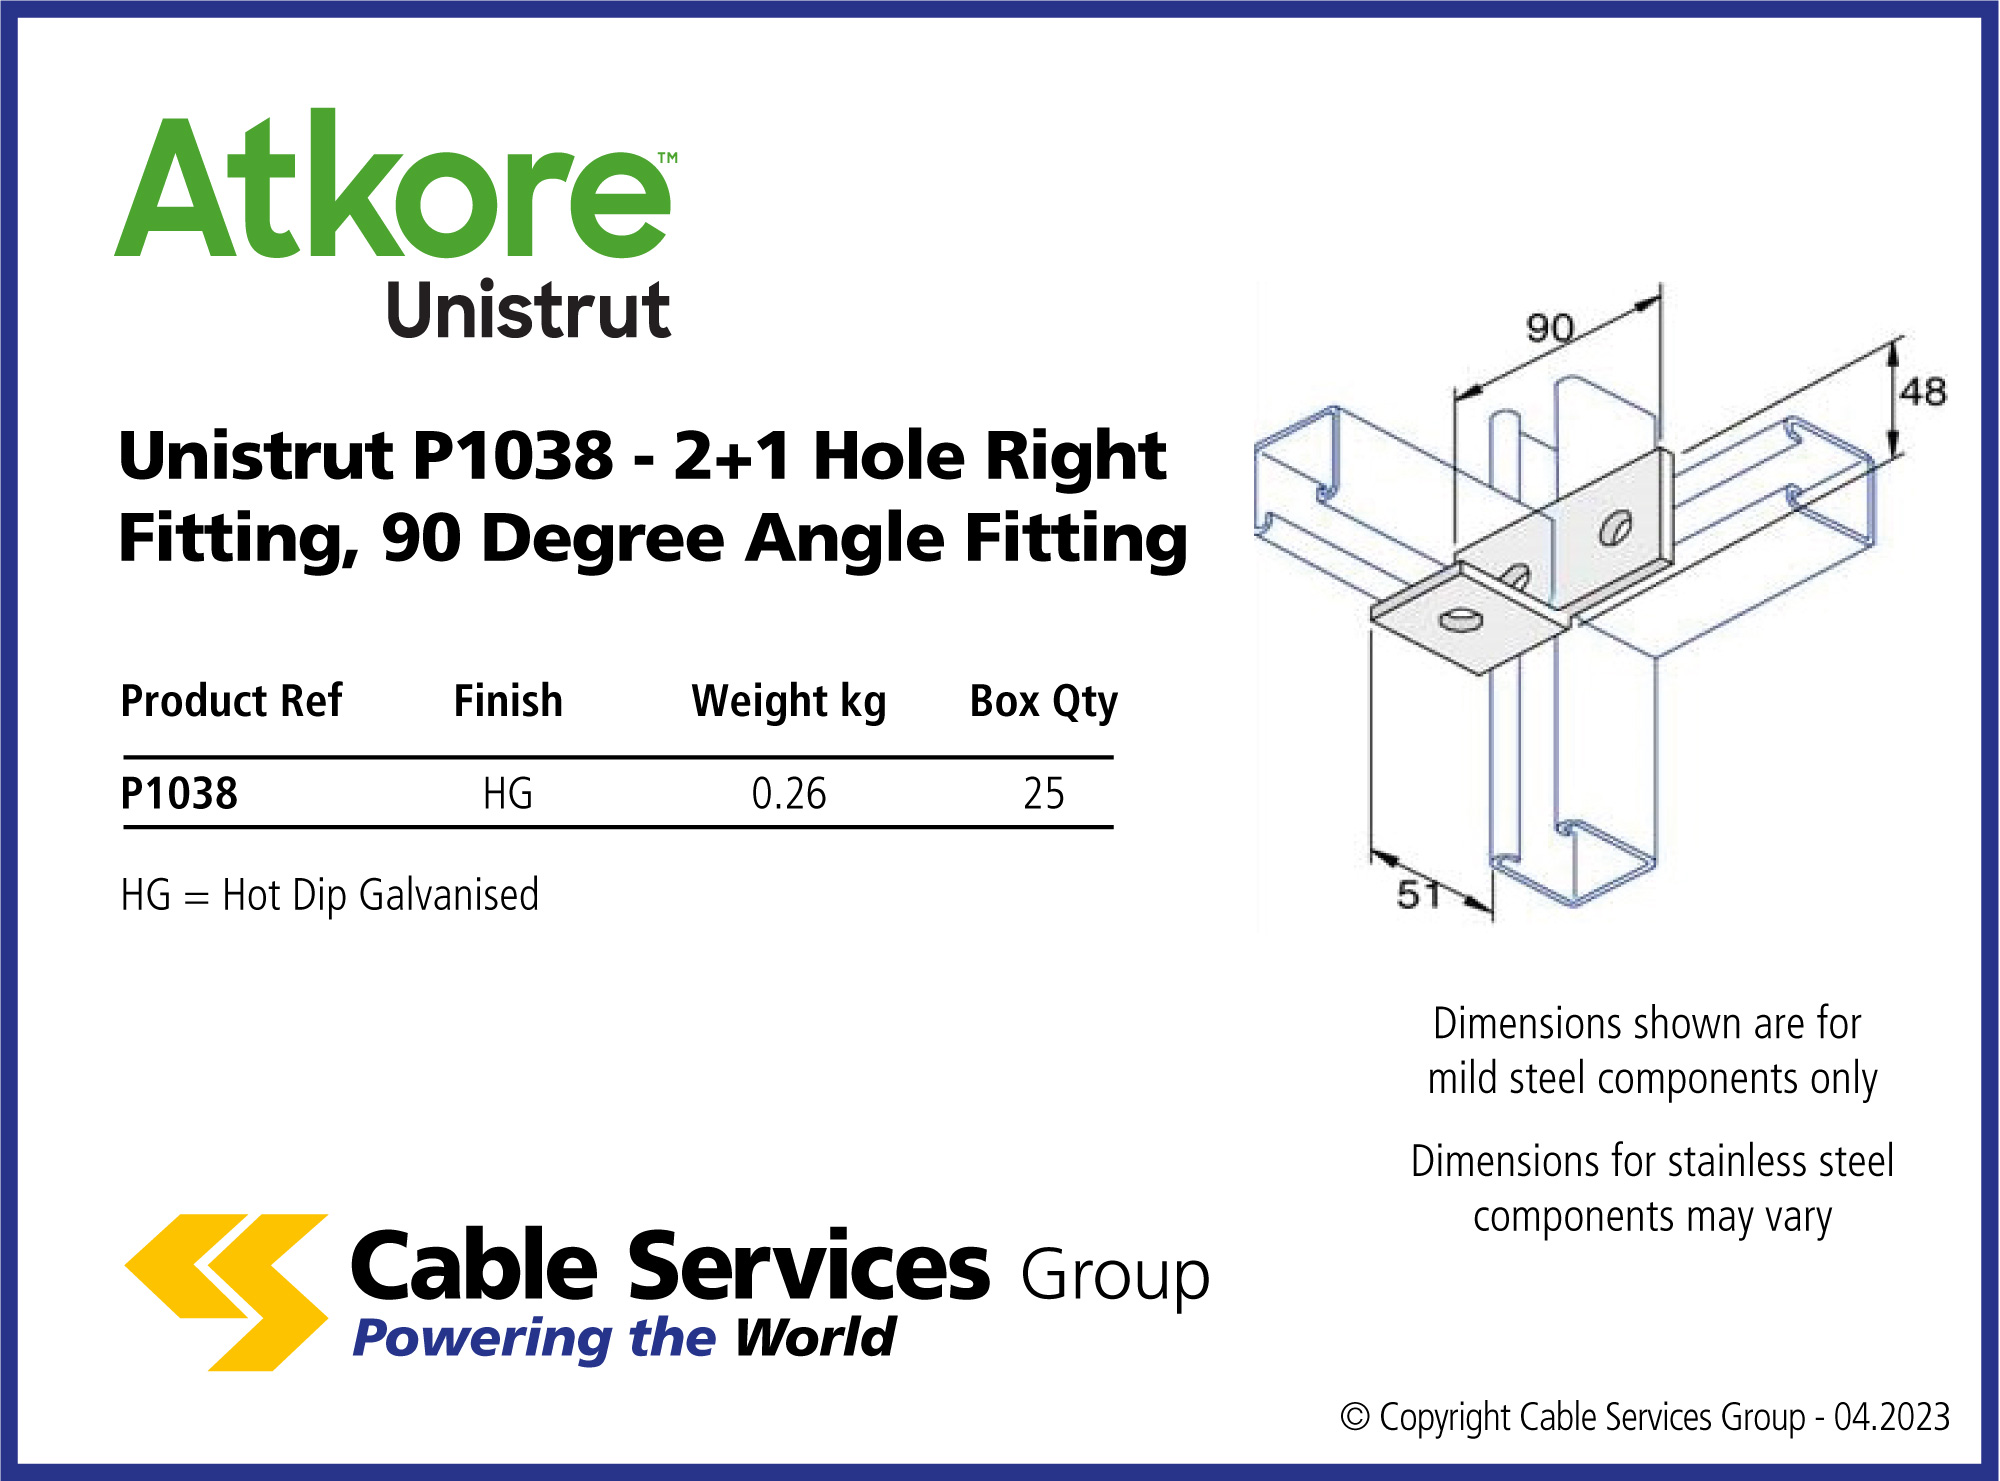 Unistrut P1038 - 2+1 Hole Right Fitting, 90 Degree Angle Fitting ...